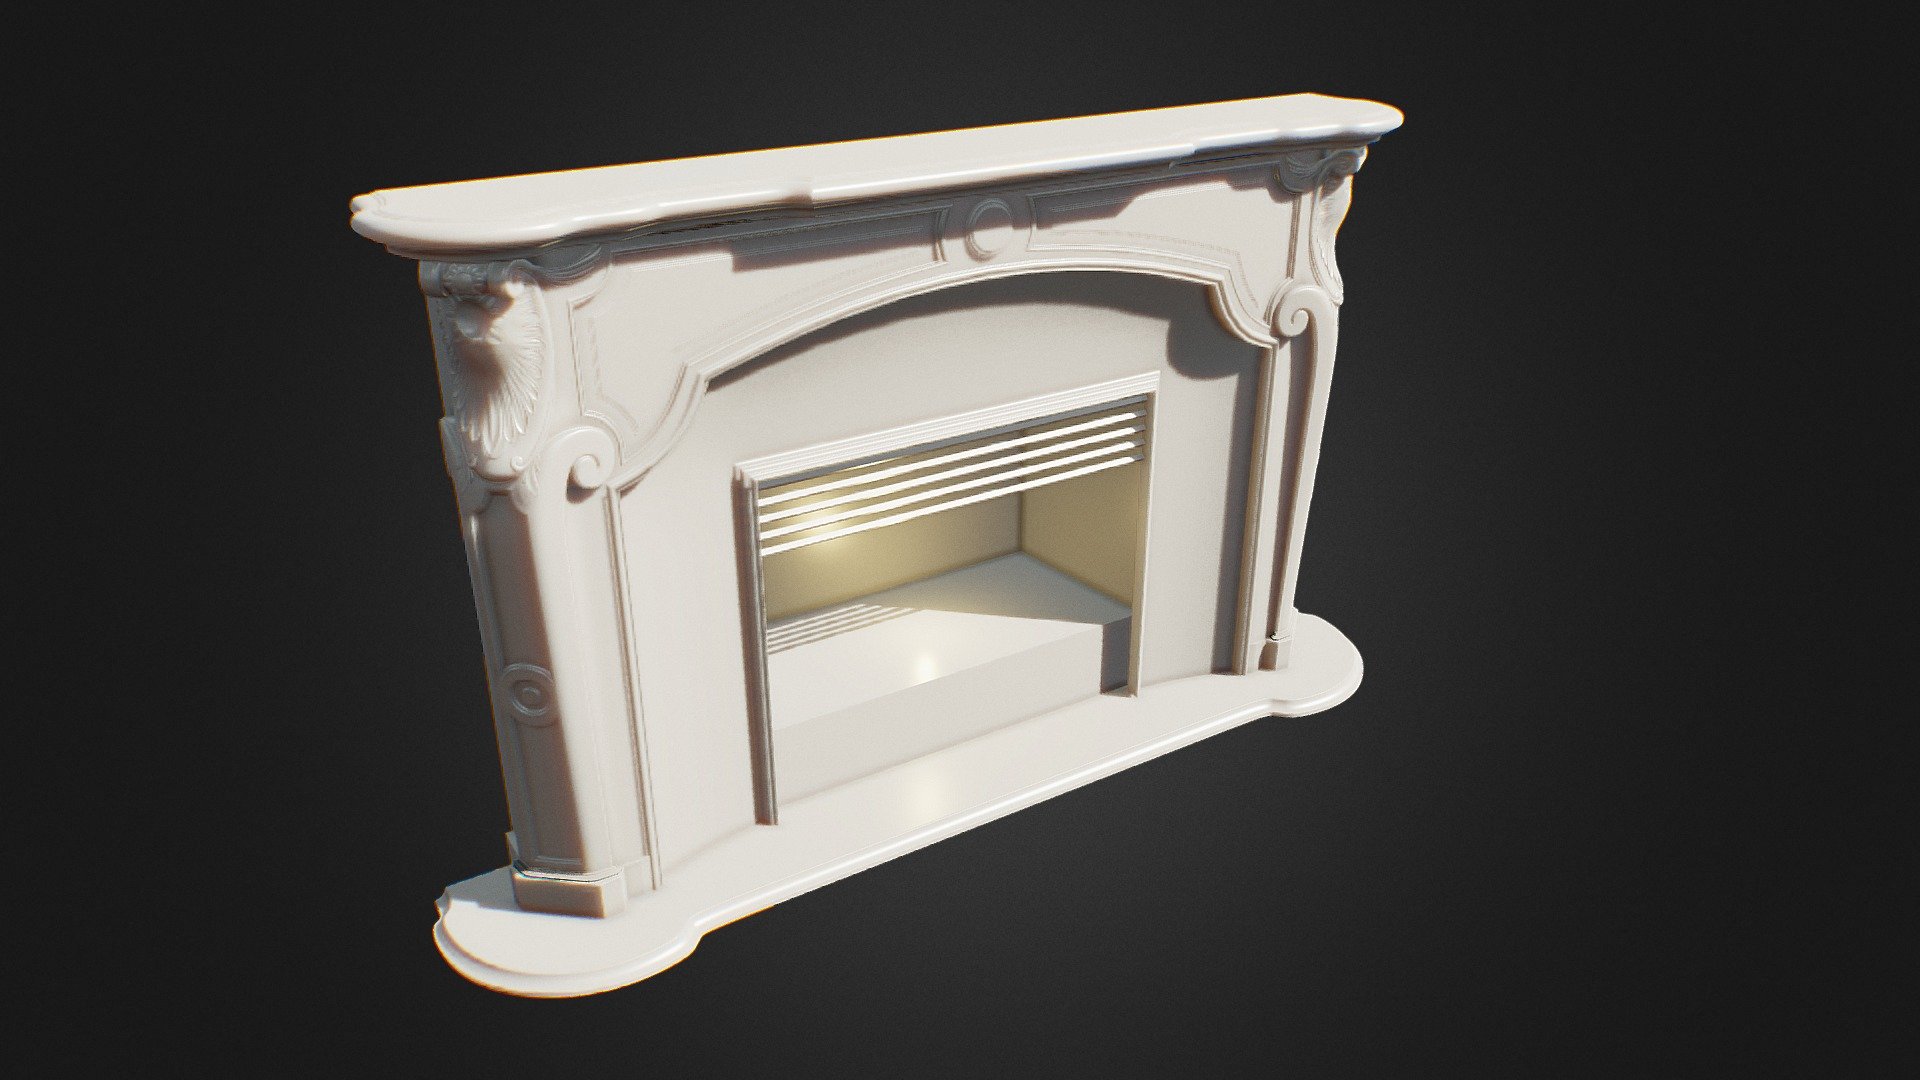 3d model of the Classic Fireplace. 
High quality model to add more details and realism to your interior rendering projects. Fully detailed model. 
Final images rendered with vray 3. No special plugin needed to open scene. 
All materials are included 3d model